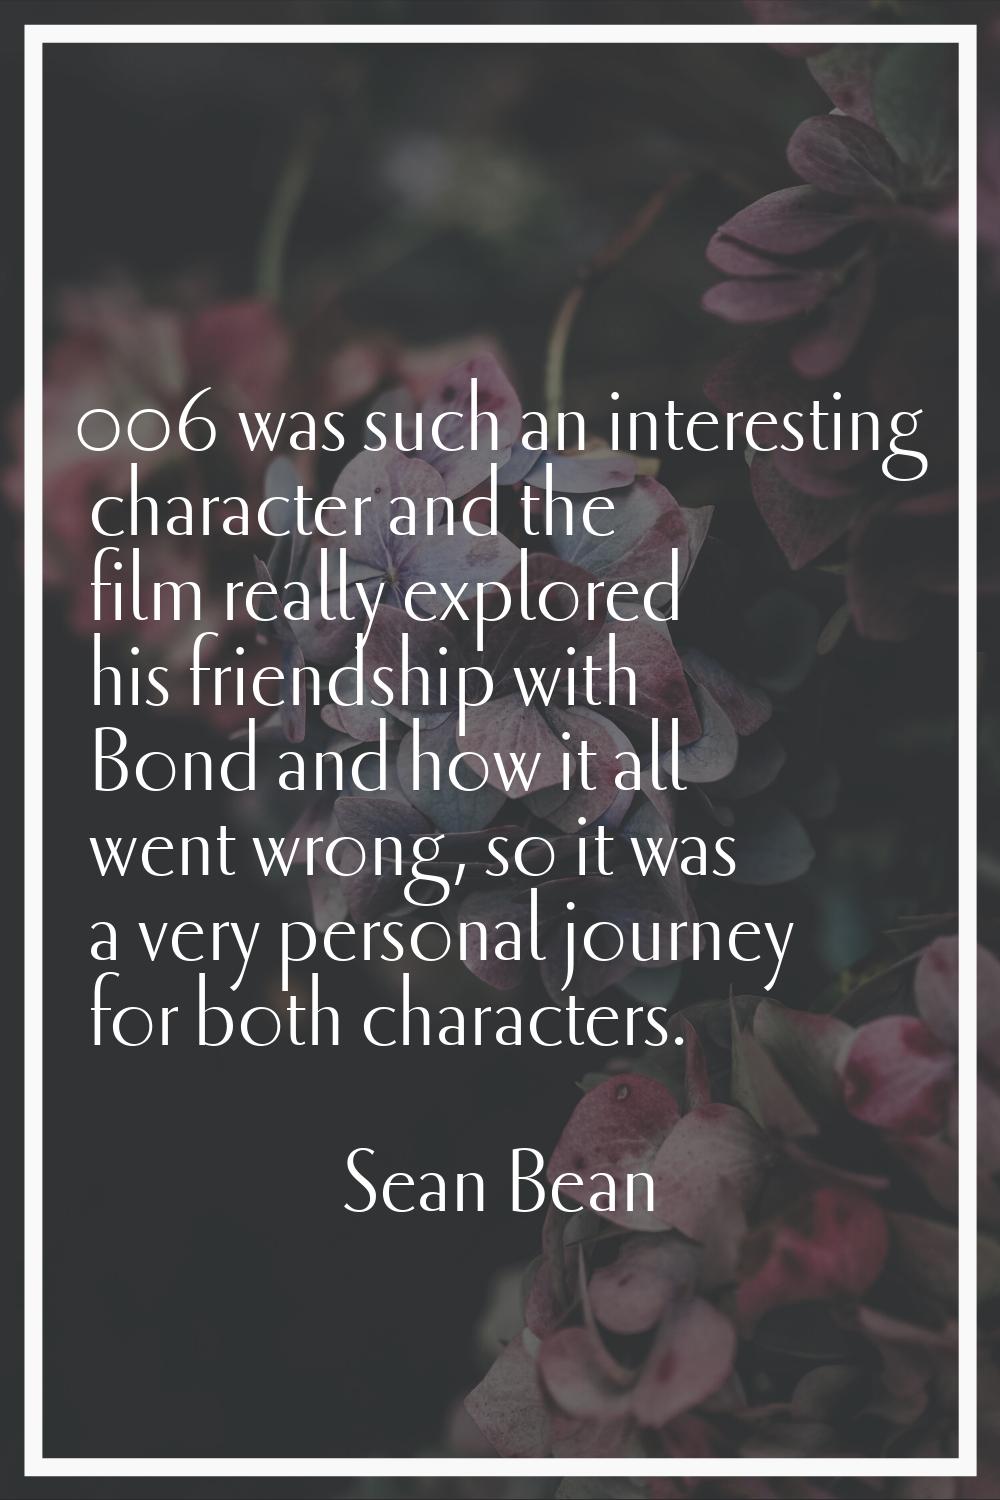 006 was such an interesting character and the film really explored his friendship with Bond and how